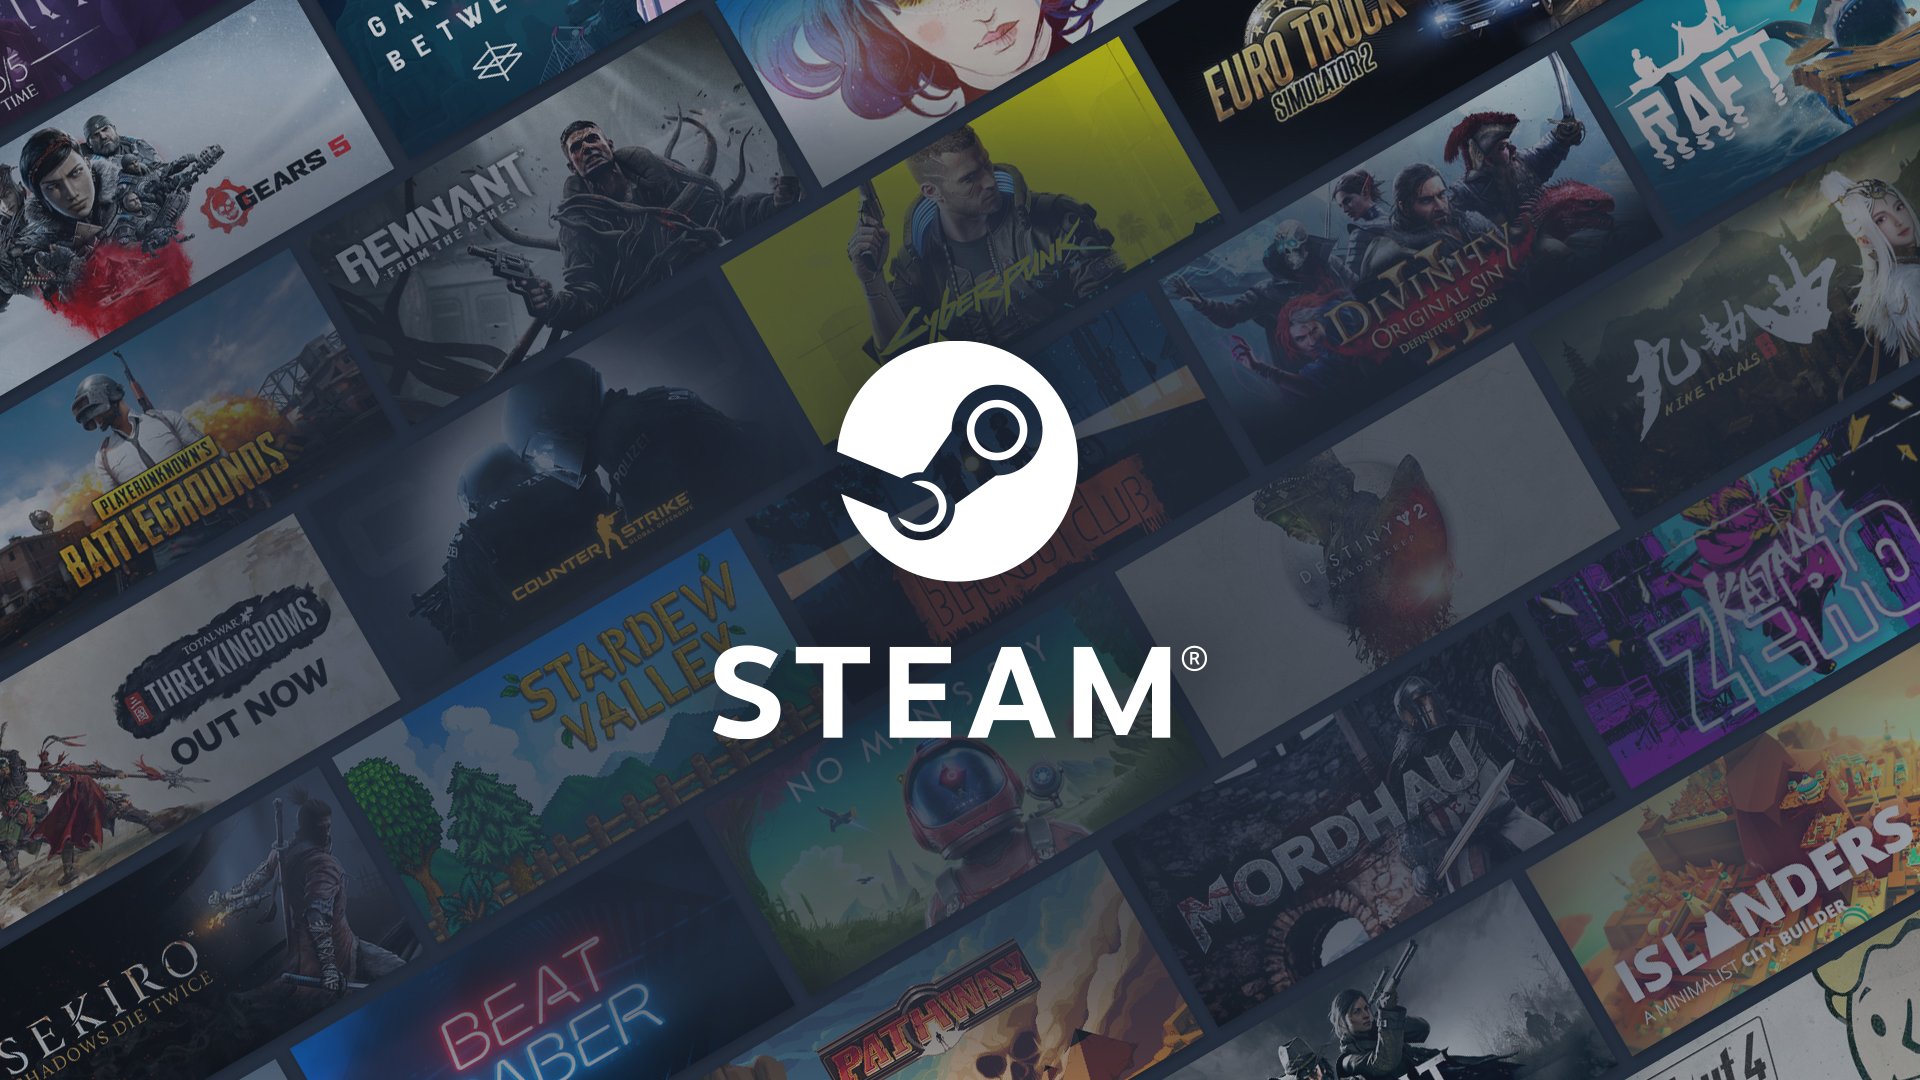 Valve adds a new way to filter for discounts during Steam sales